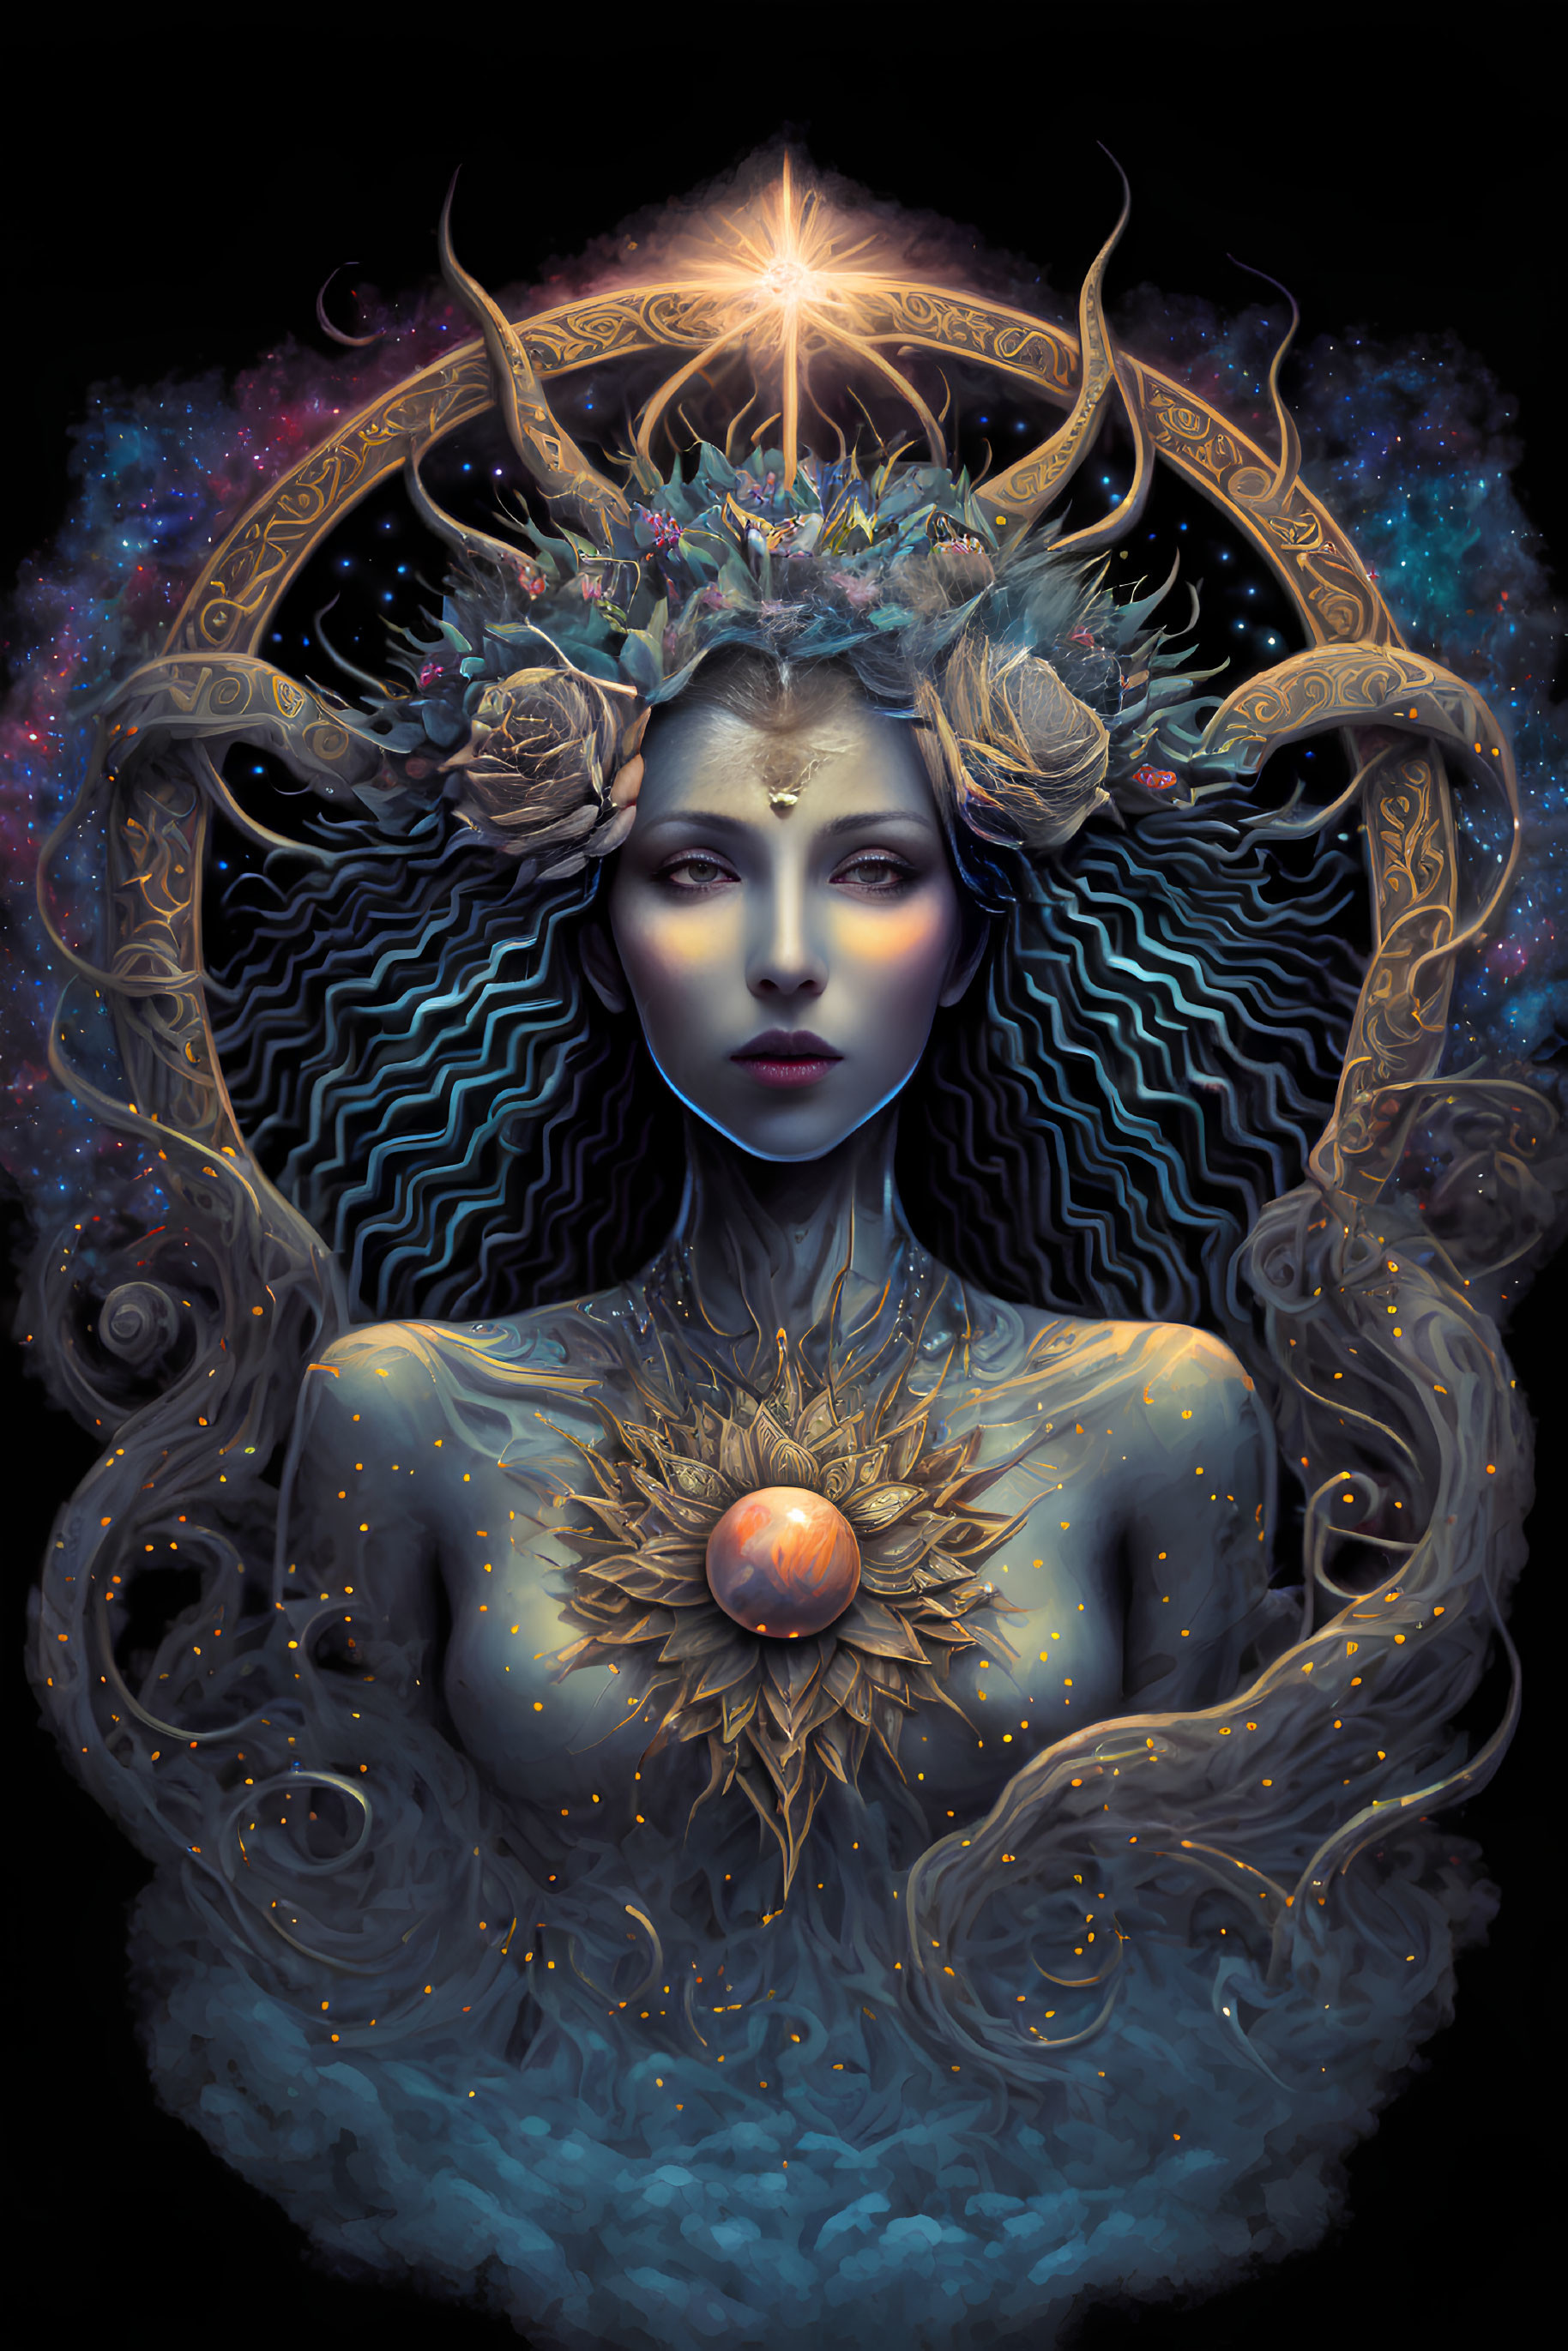 Mystical female figure with cosmic antlers and radiant heart